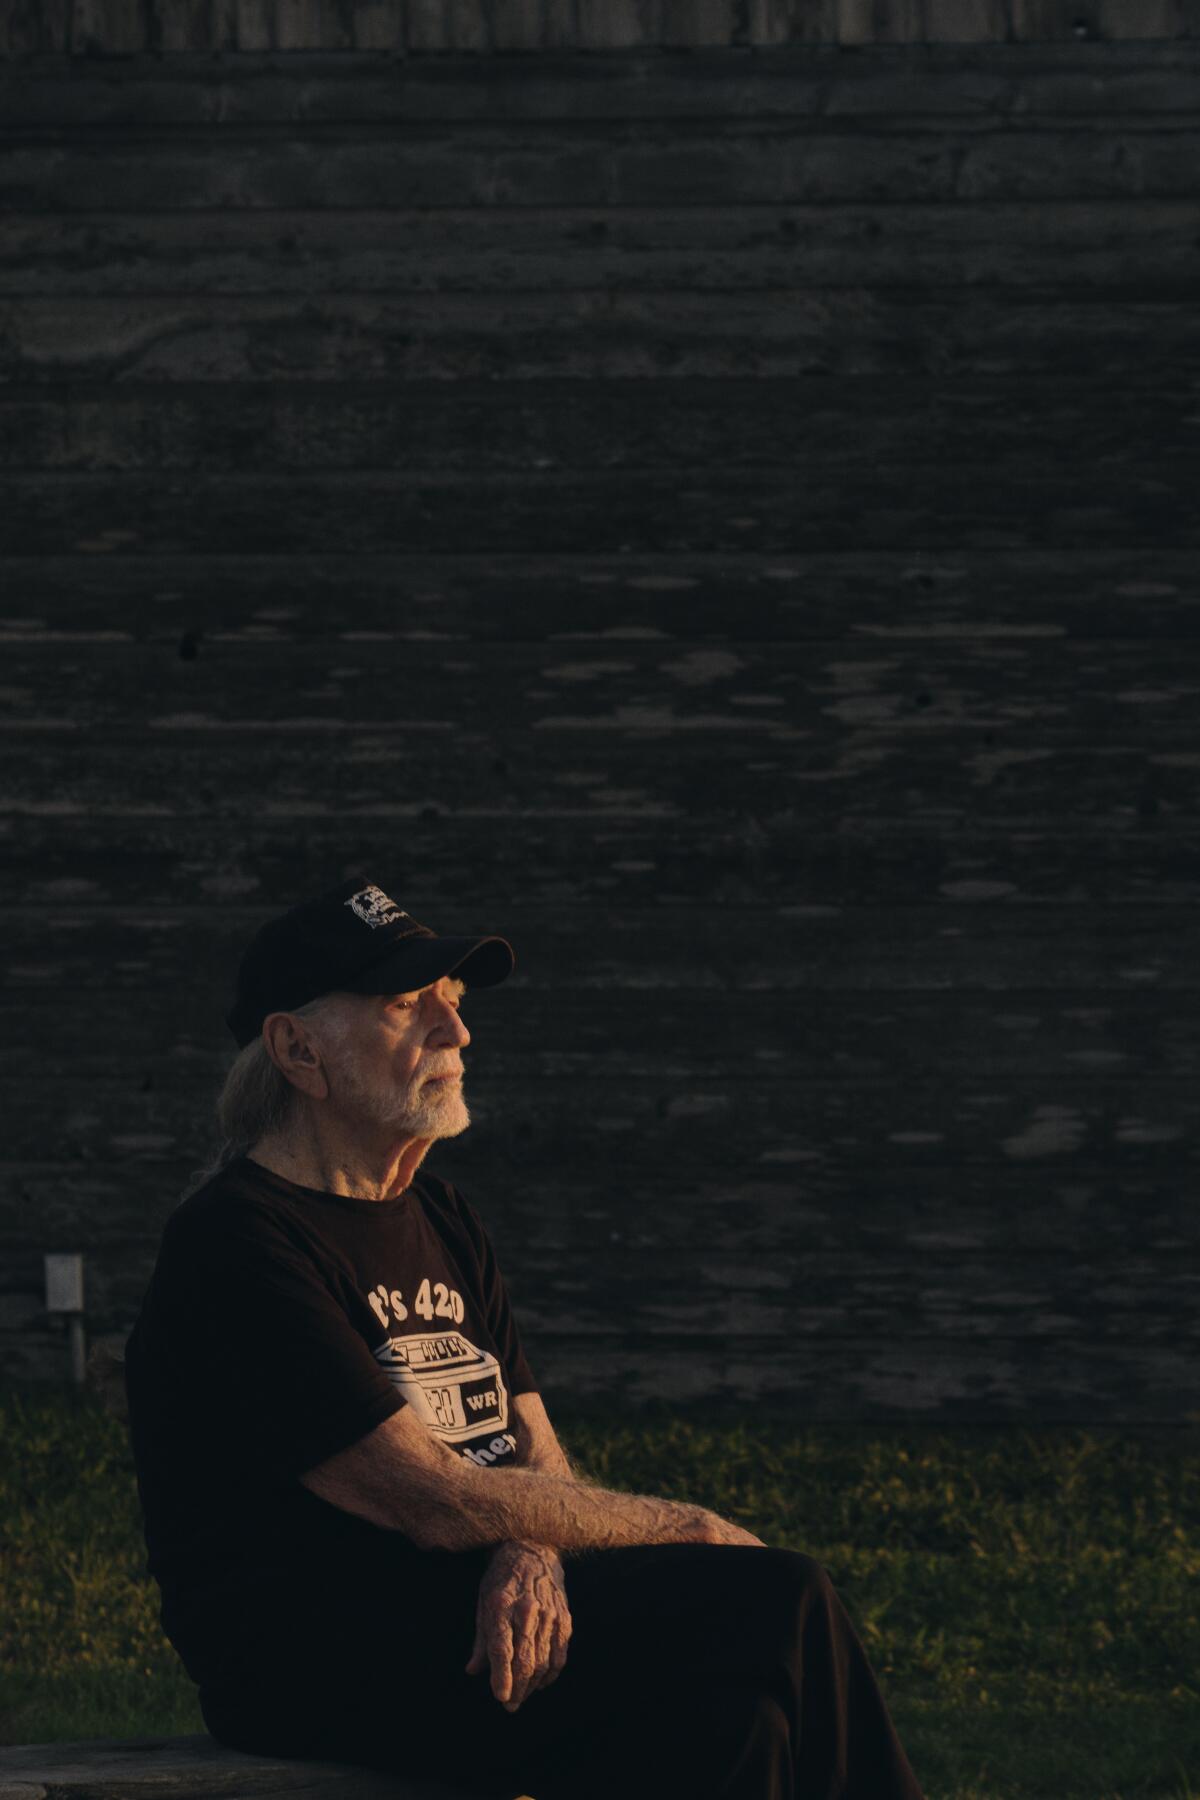 Willie Nelson sitting outside in a T-shirt against a dark background